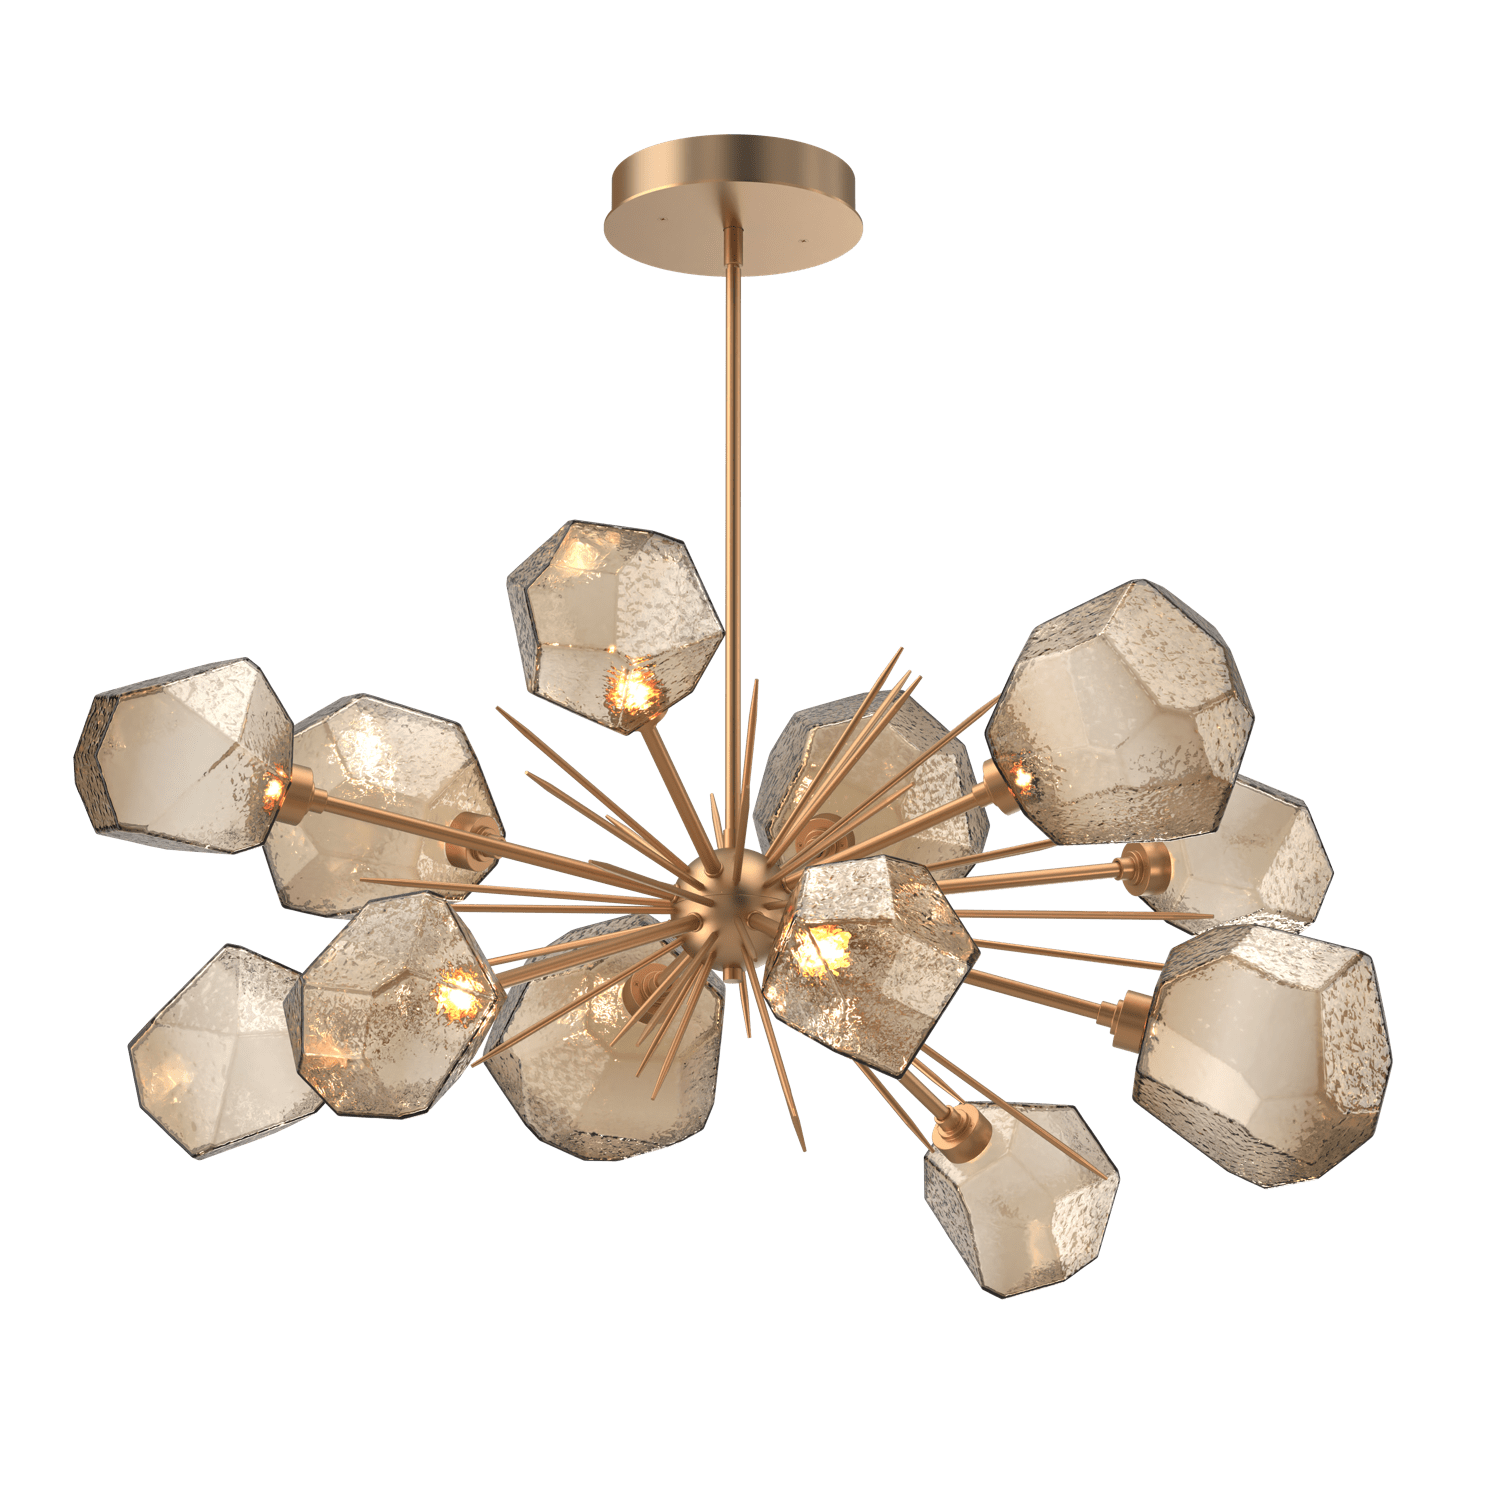 PLB0039-0D-NB-B-Hammerton-Studio-Gem-43-inch-oval-starburst-chandelier-with-novel-brass-finish-and-bronze-blown-glass-shades-and-LED-lamping